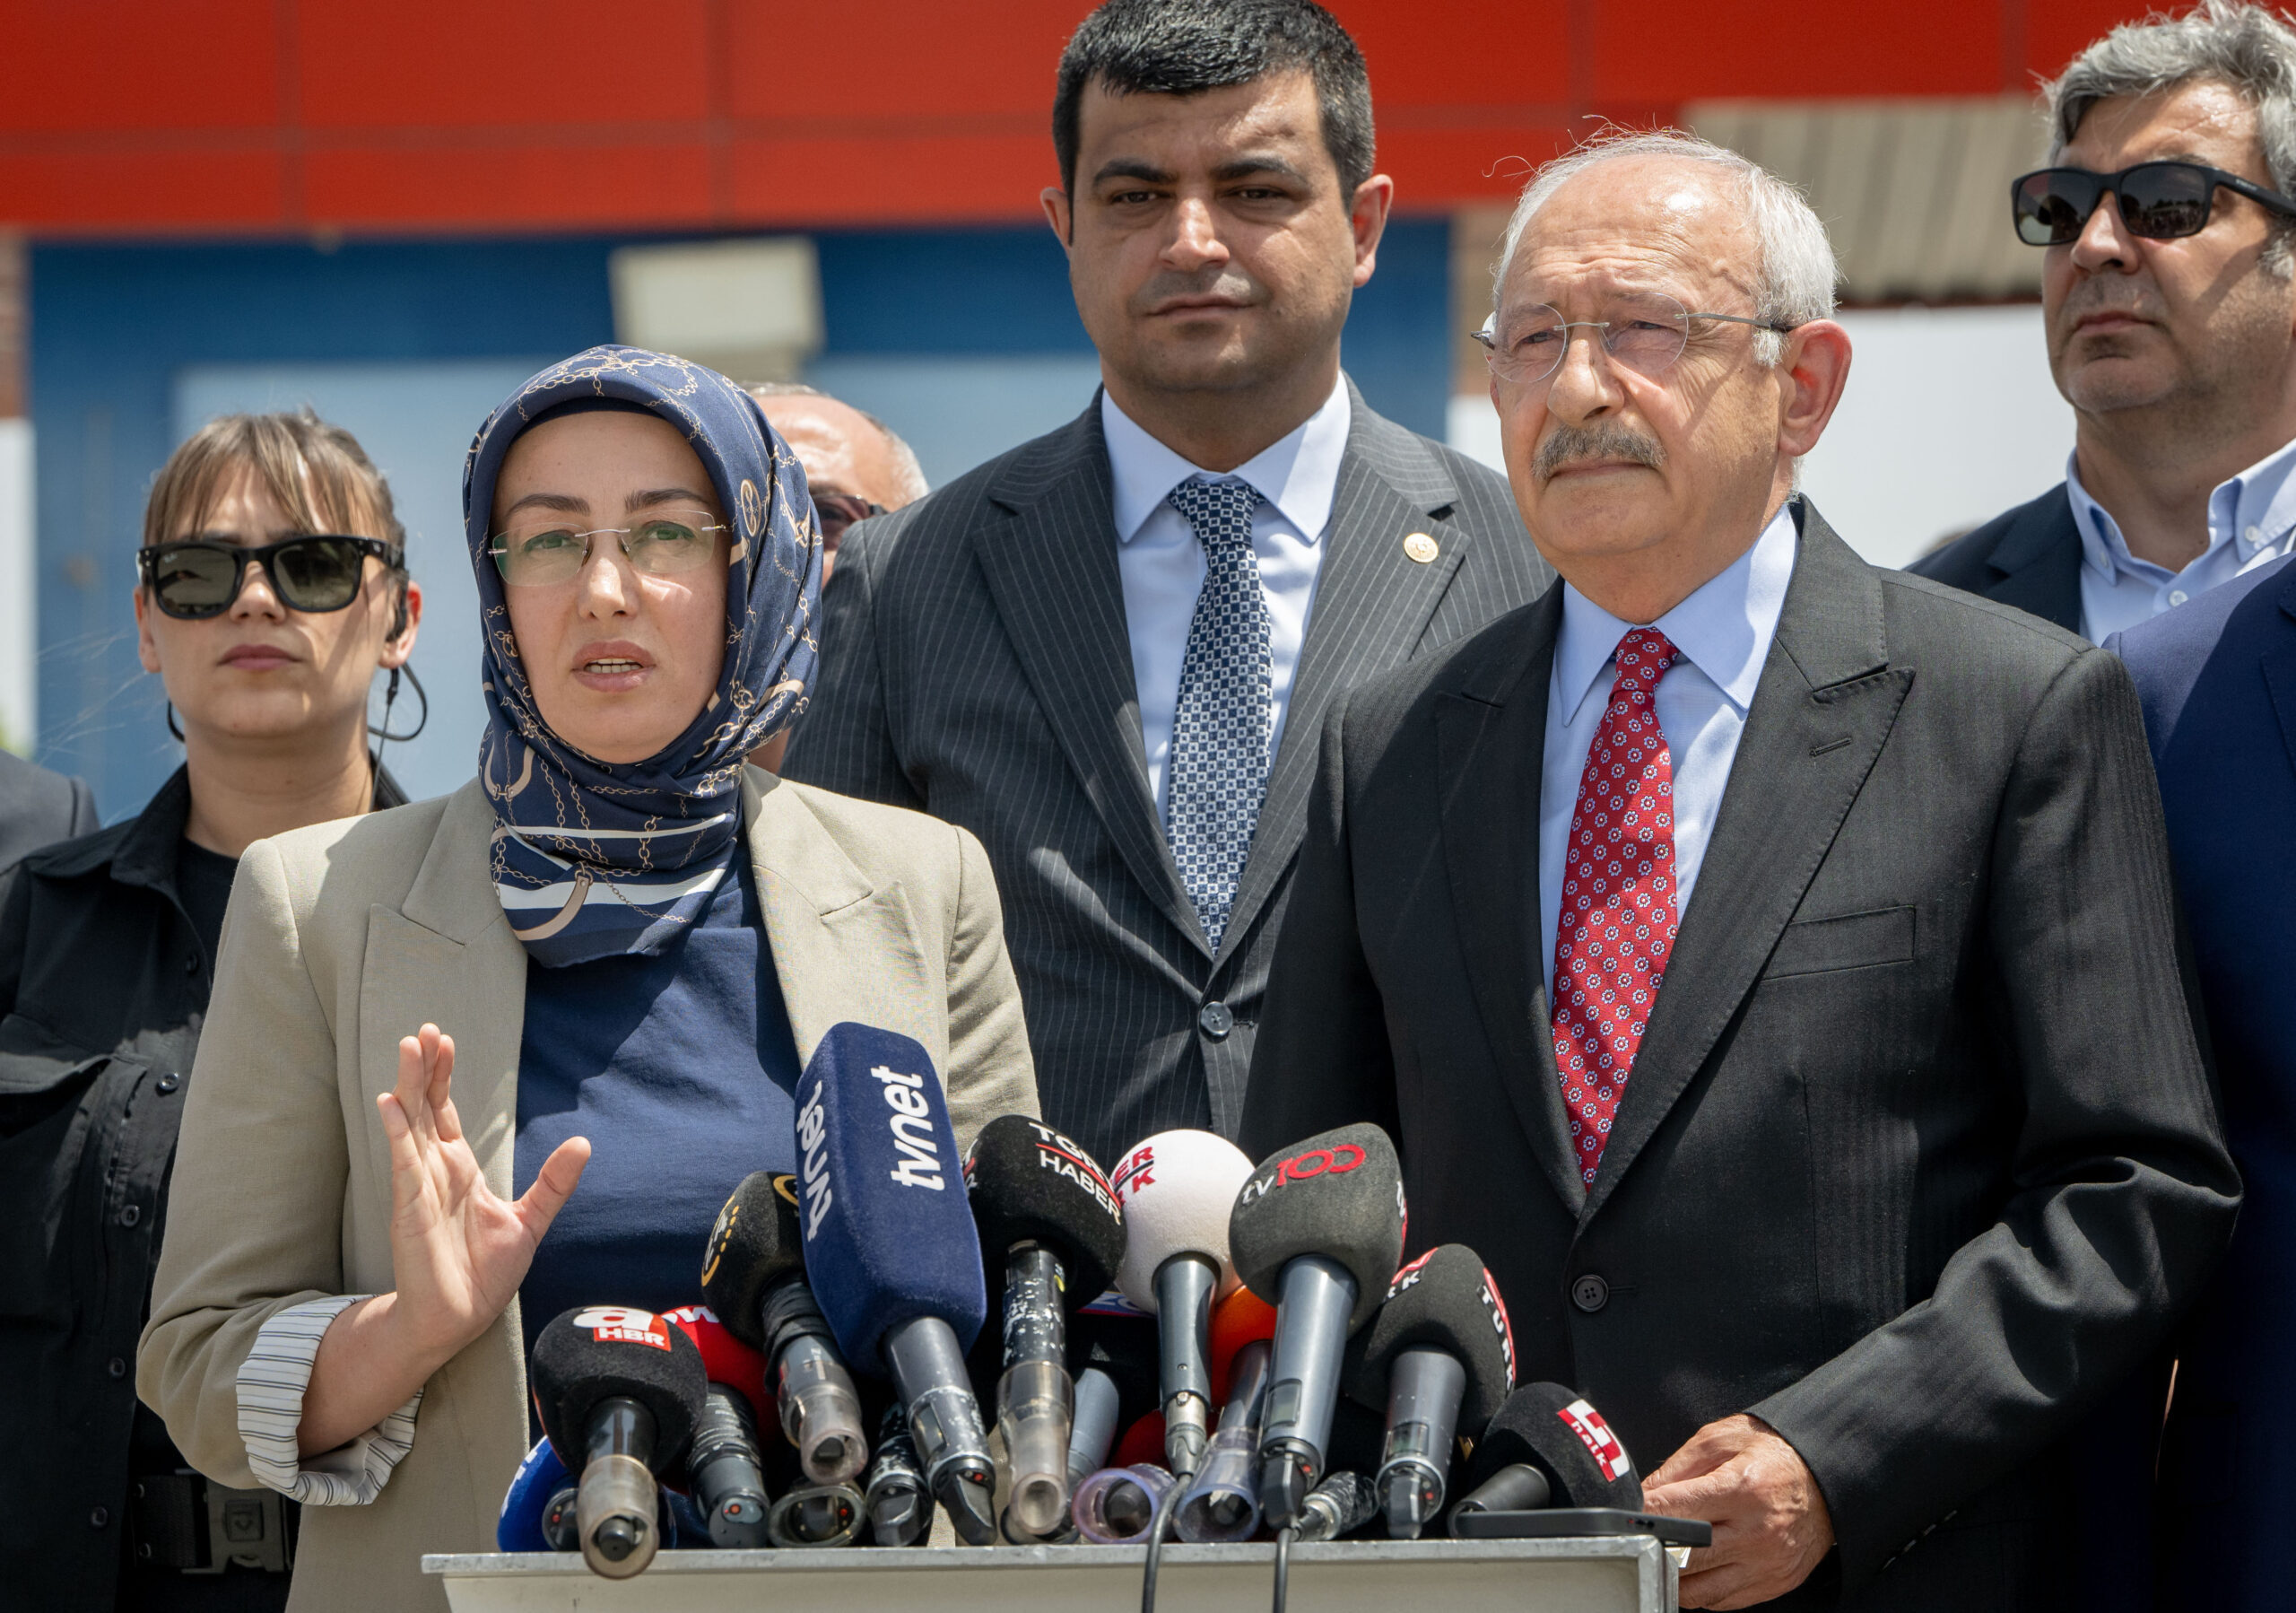 Ayse Ates and Kemal Kilicdaroglu advocate for justice in Sinan Ates murder trial